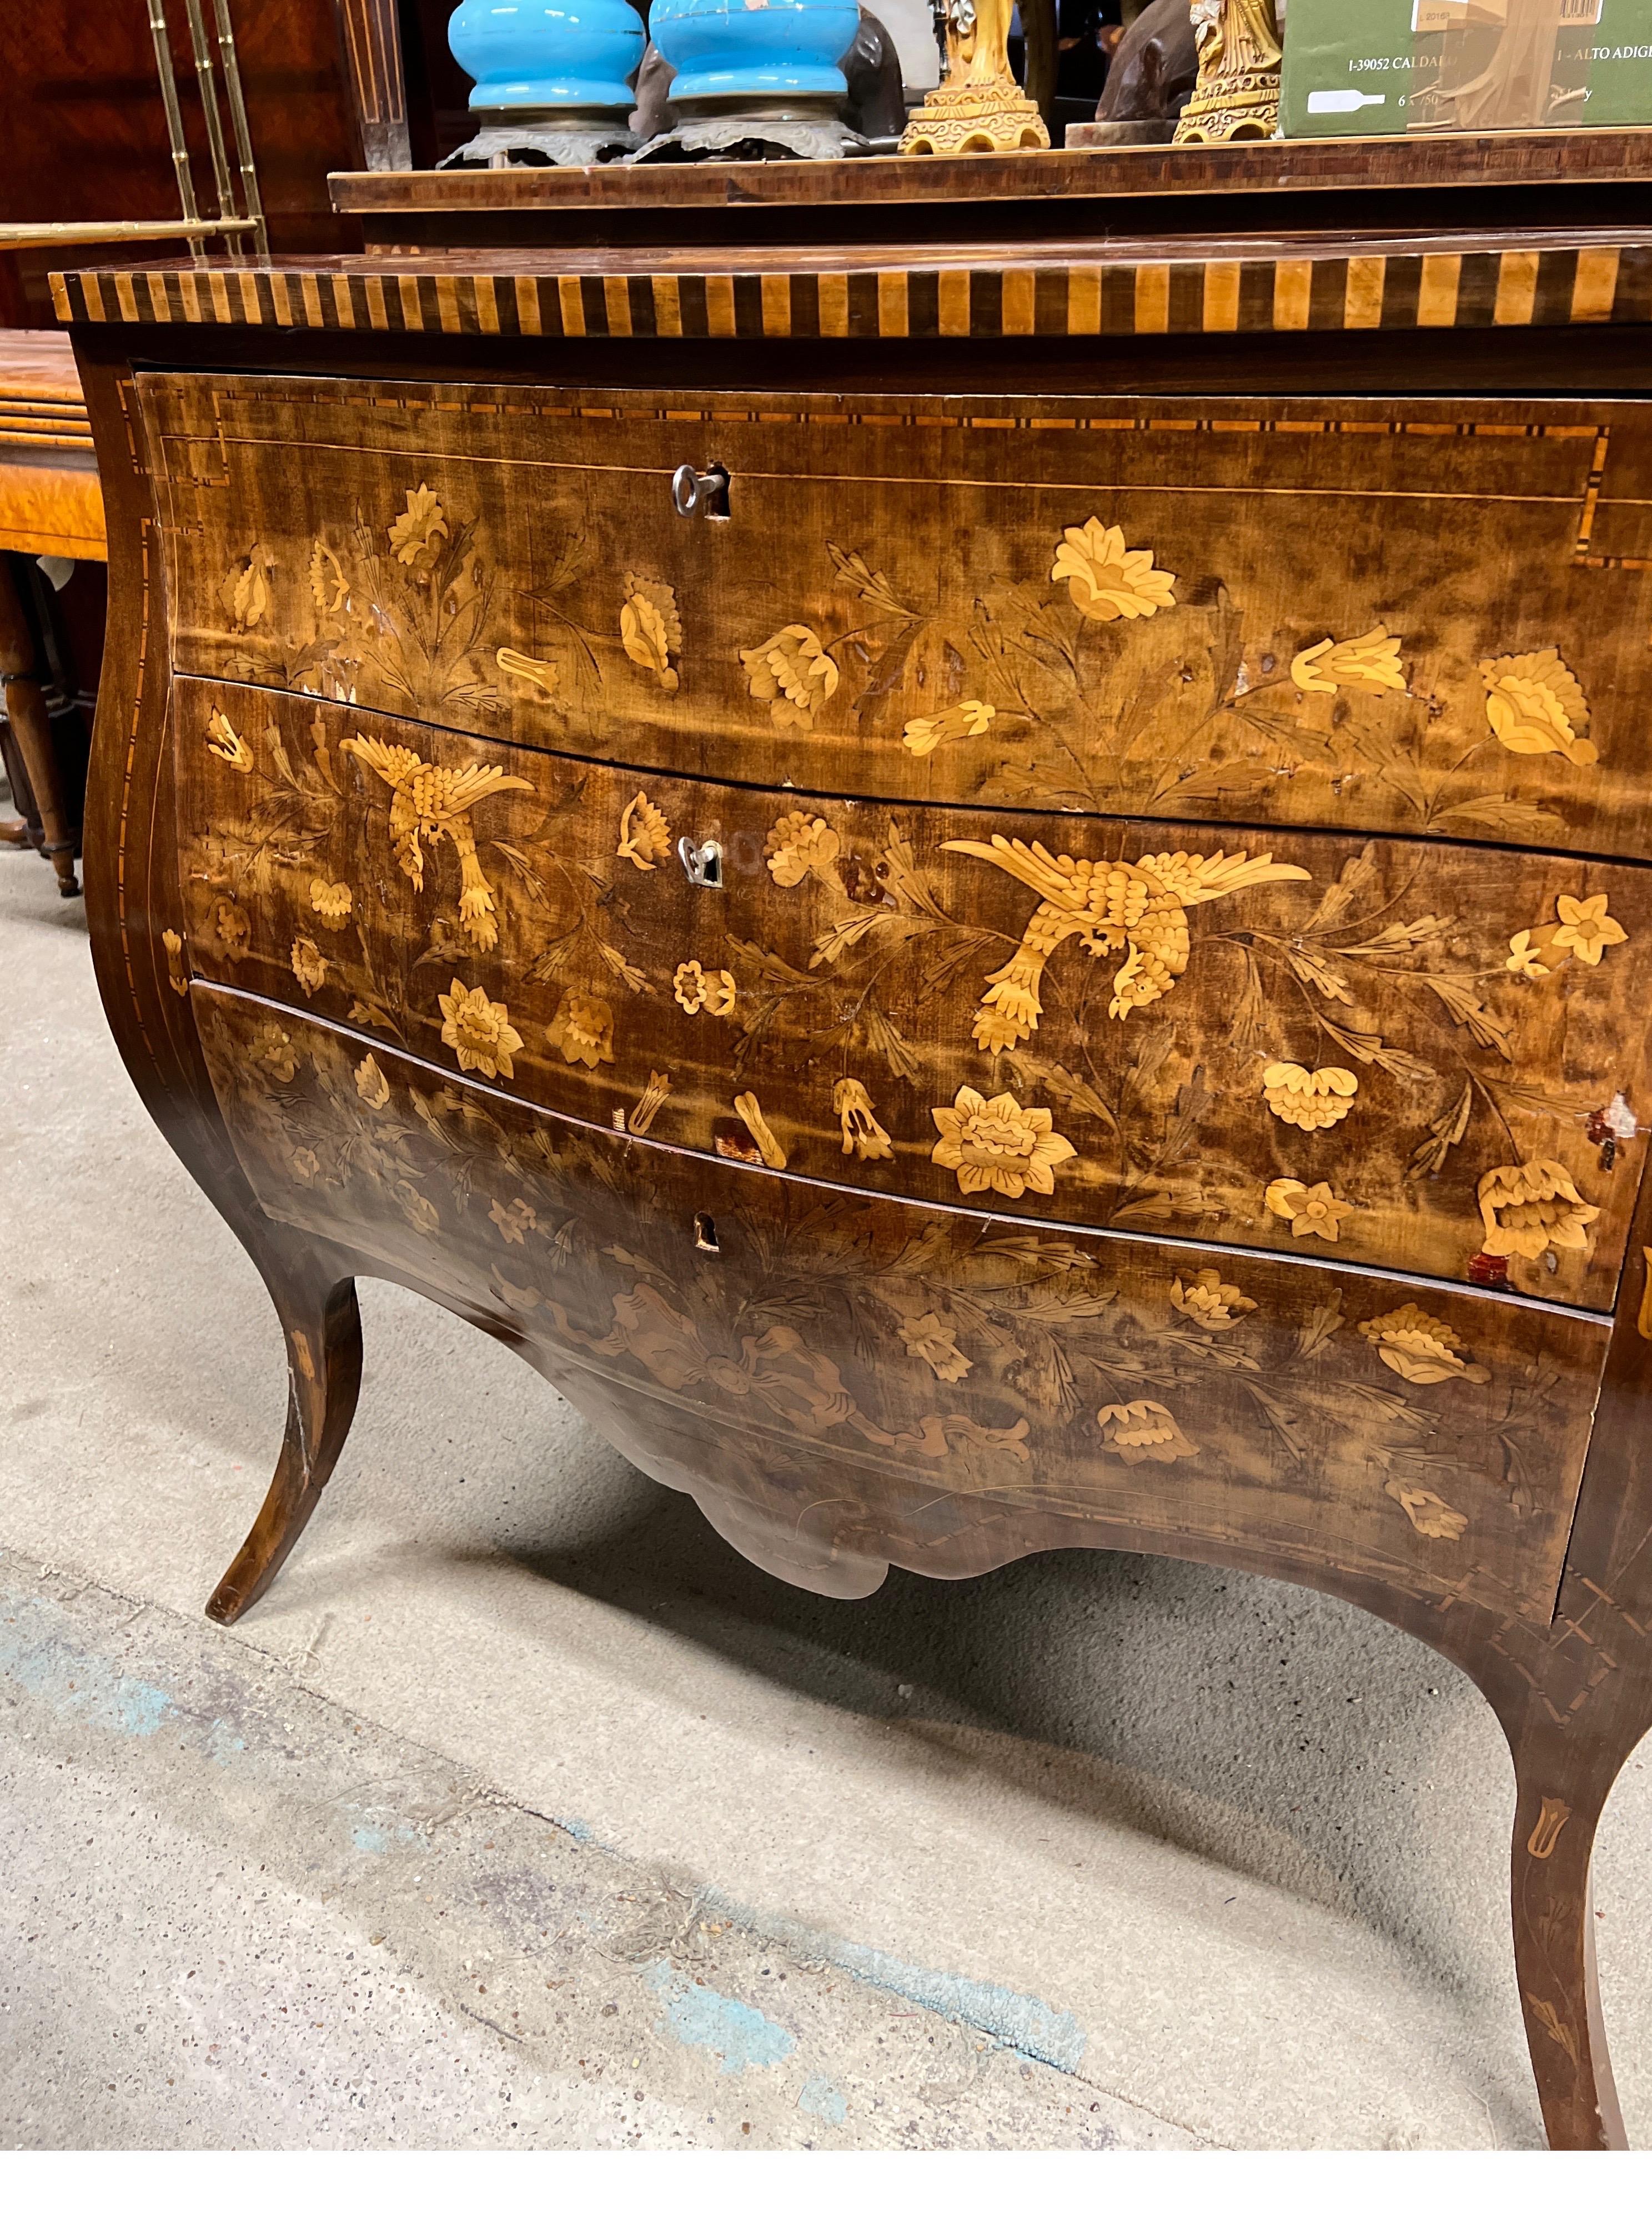 Rare Dutch chest of drawers of convex shape, embellished with floral and bird motif inlays. Moved legs and two front curved drawers. Made of mahogany wood and fruitwood inlays, early 19th century era on the forms and style of the Louis XV period.